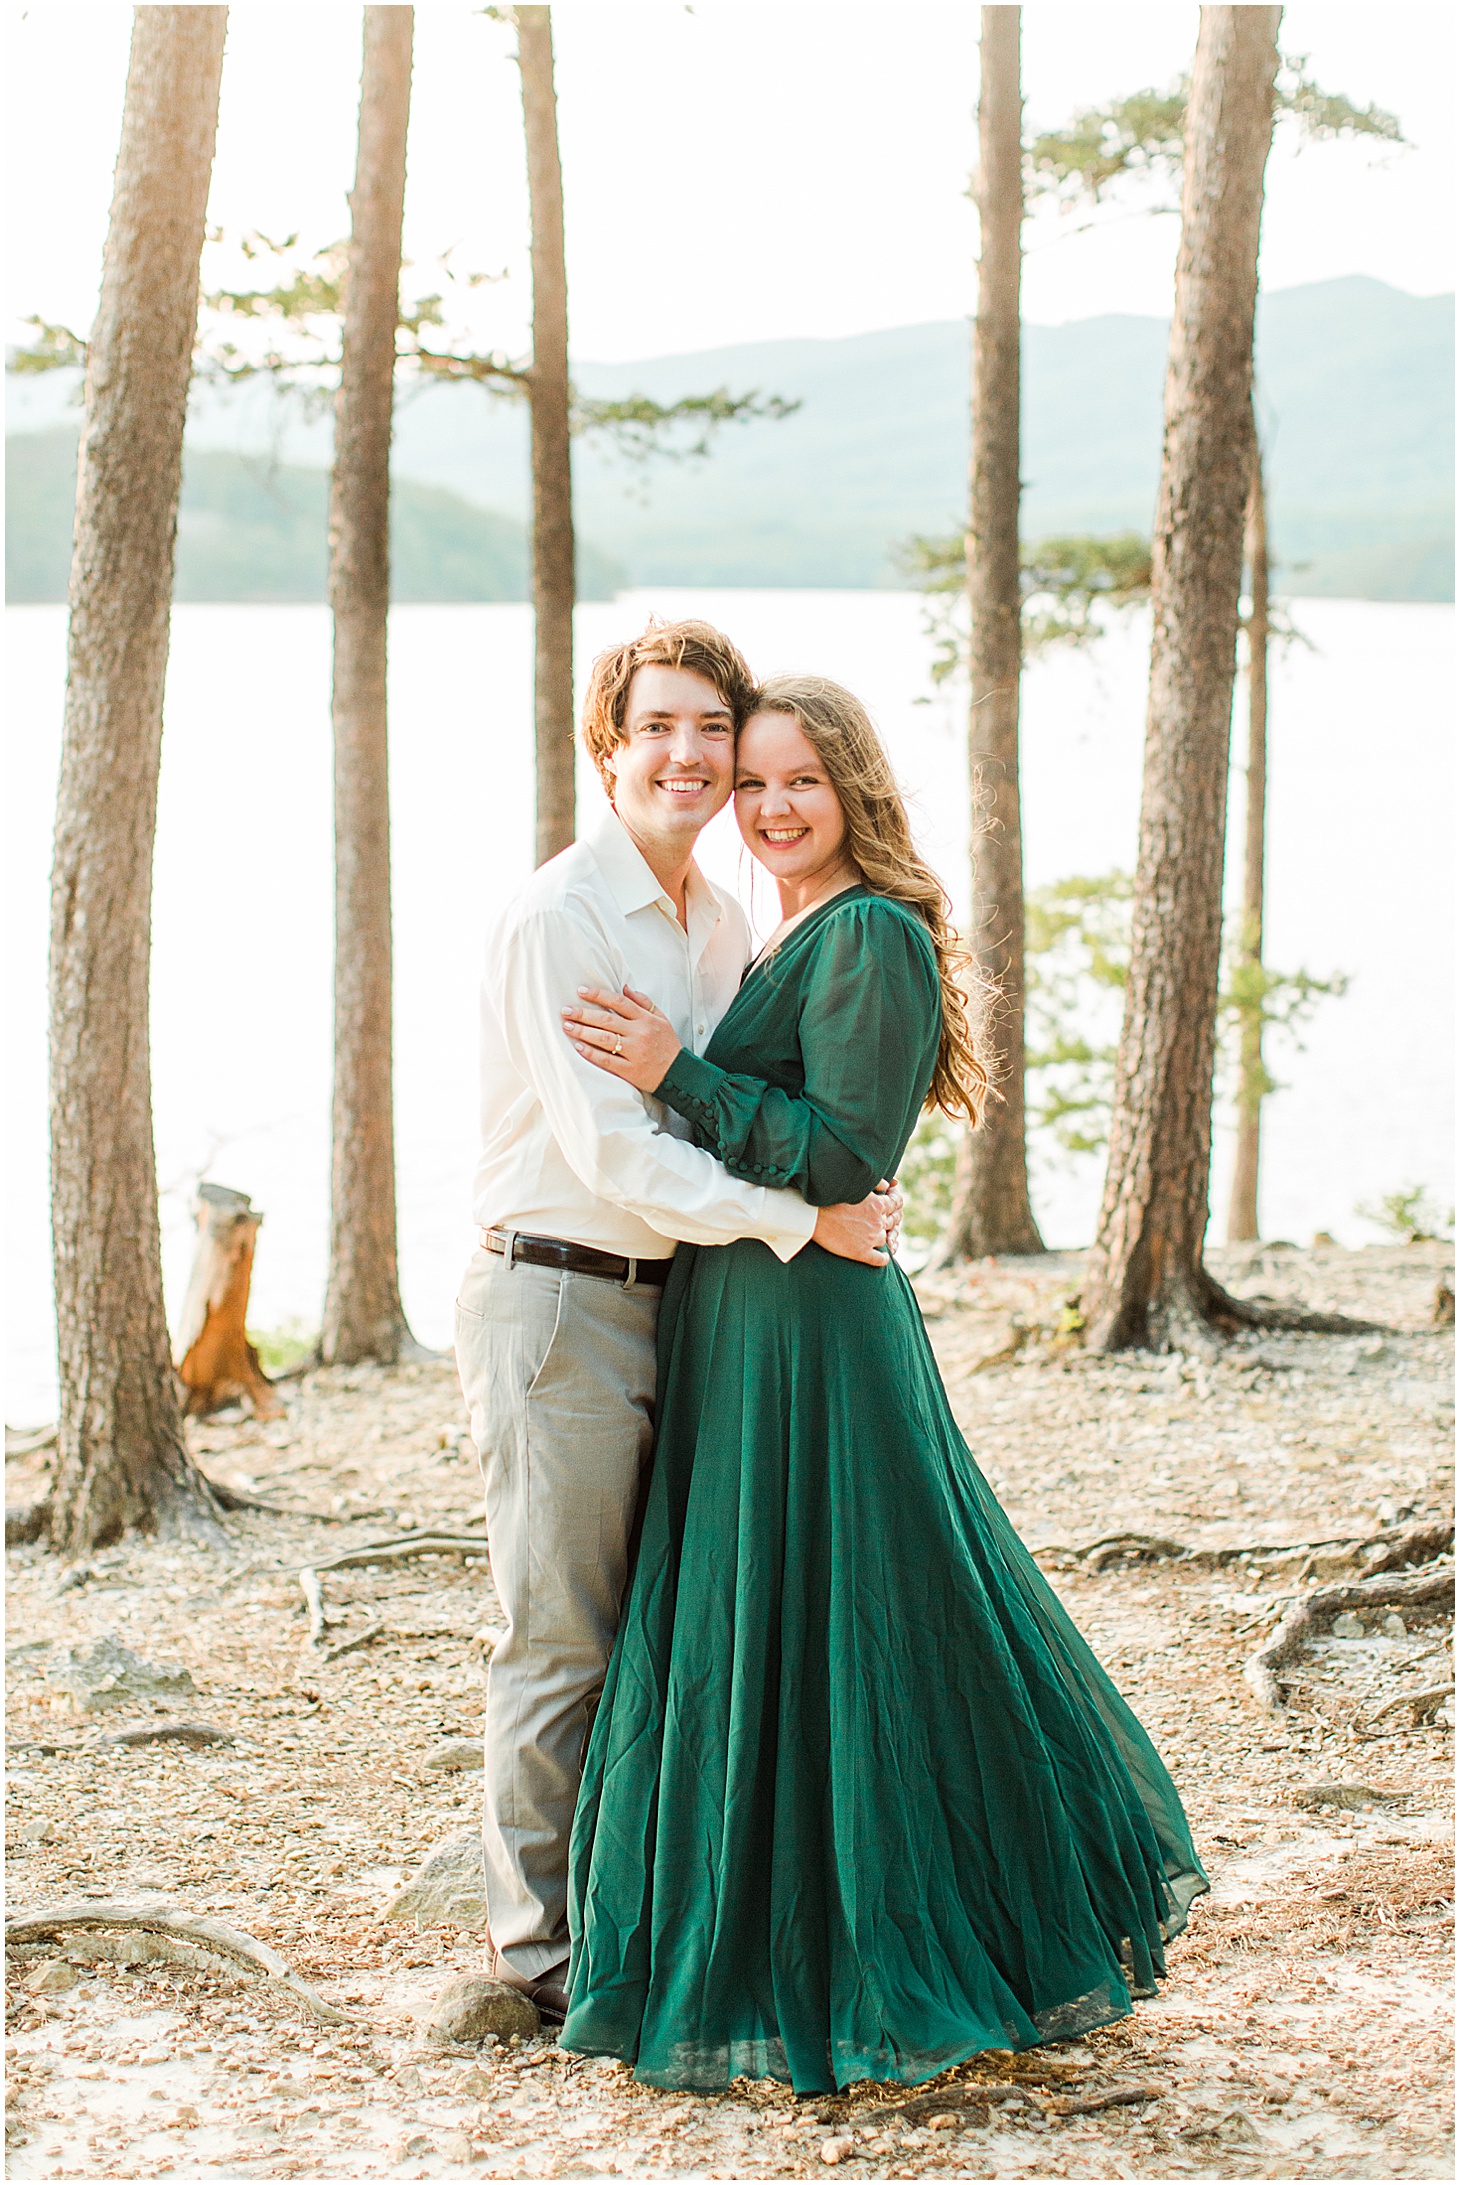 carvinscoveengagementsession_roanokeengagementsession_carvinscove_virginiawedding_virginiaweddingphotographer_vaweddingphotographer_photo_0059.jpg